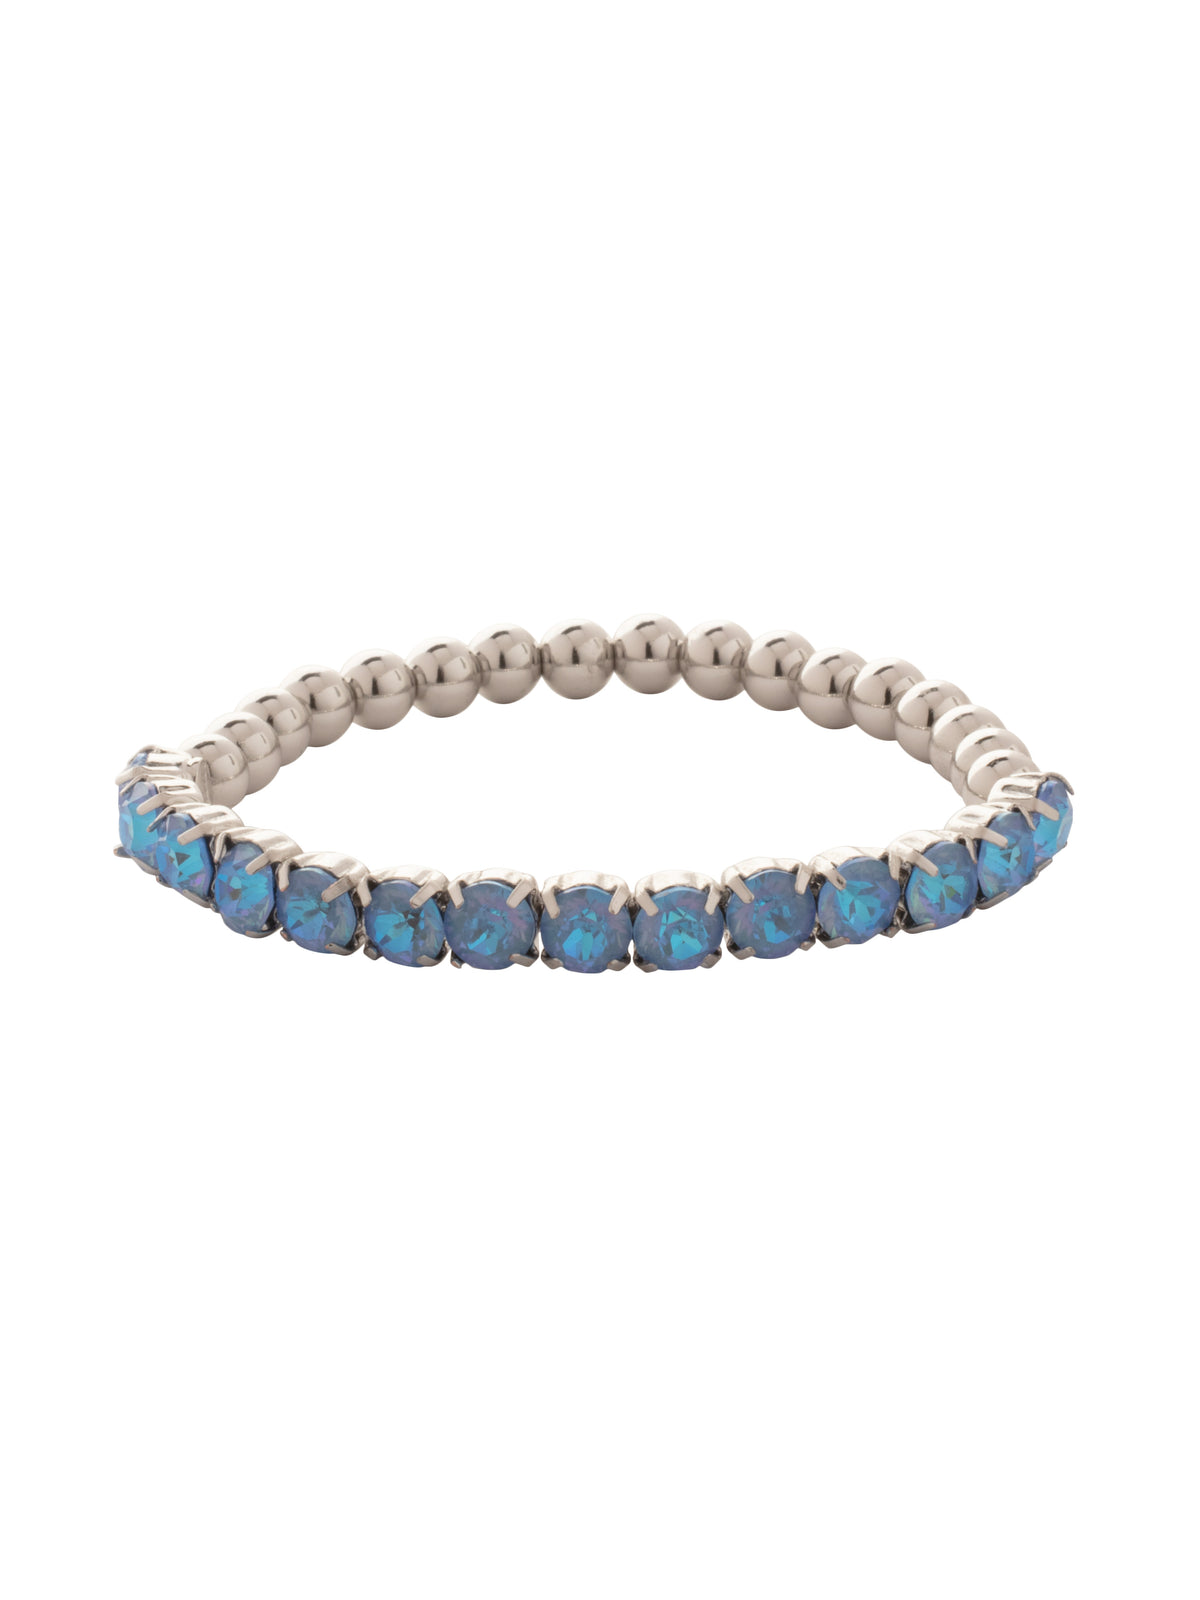 Mini Crystal Mini Zola Stretch Bracelet - BFN23PDOCD - <p>The Mini Crystal Mini Zola Stretch Bracelet features round cut crystals and metal beads on a sturdy jewelers' filament, stretching to fit most wrists comfortably, without the hassle of a clasp! (7 inches in diameter, fits average wrist sizes) From Sorrelli's Ocean Delite collection in our Palladium finish.</p>